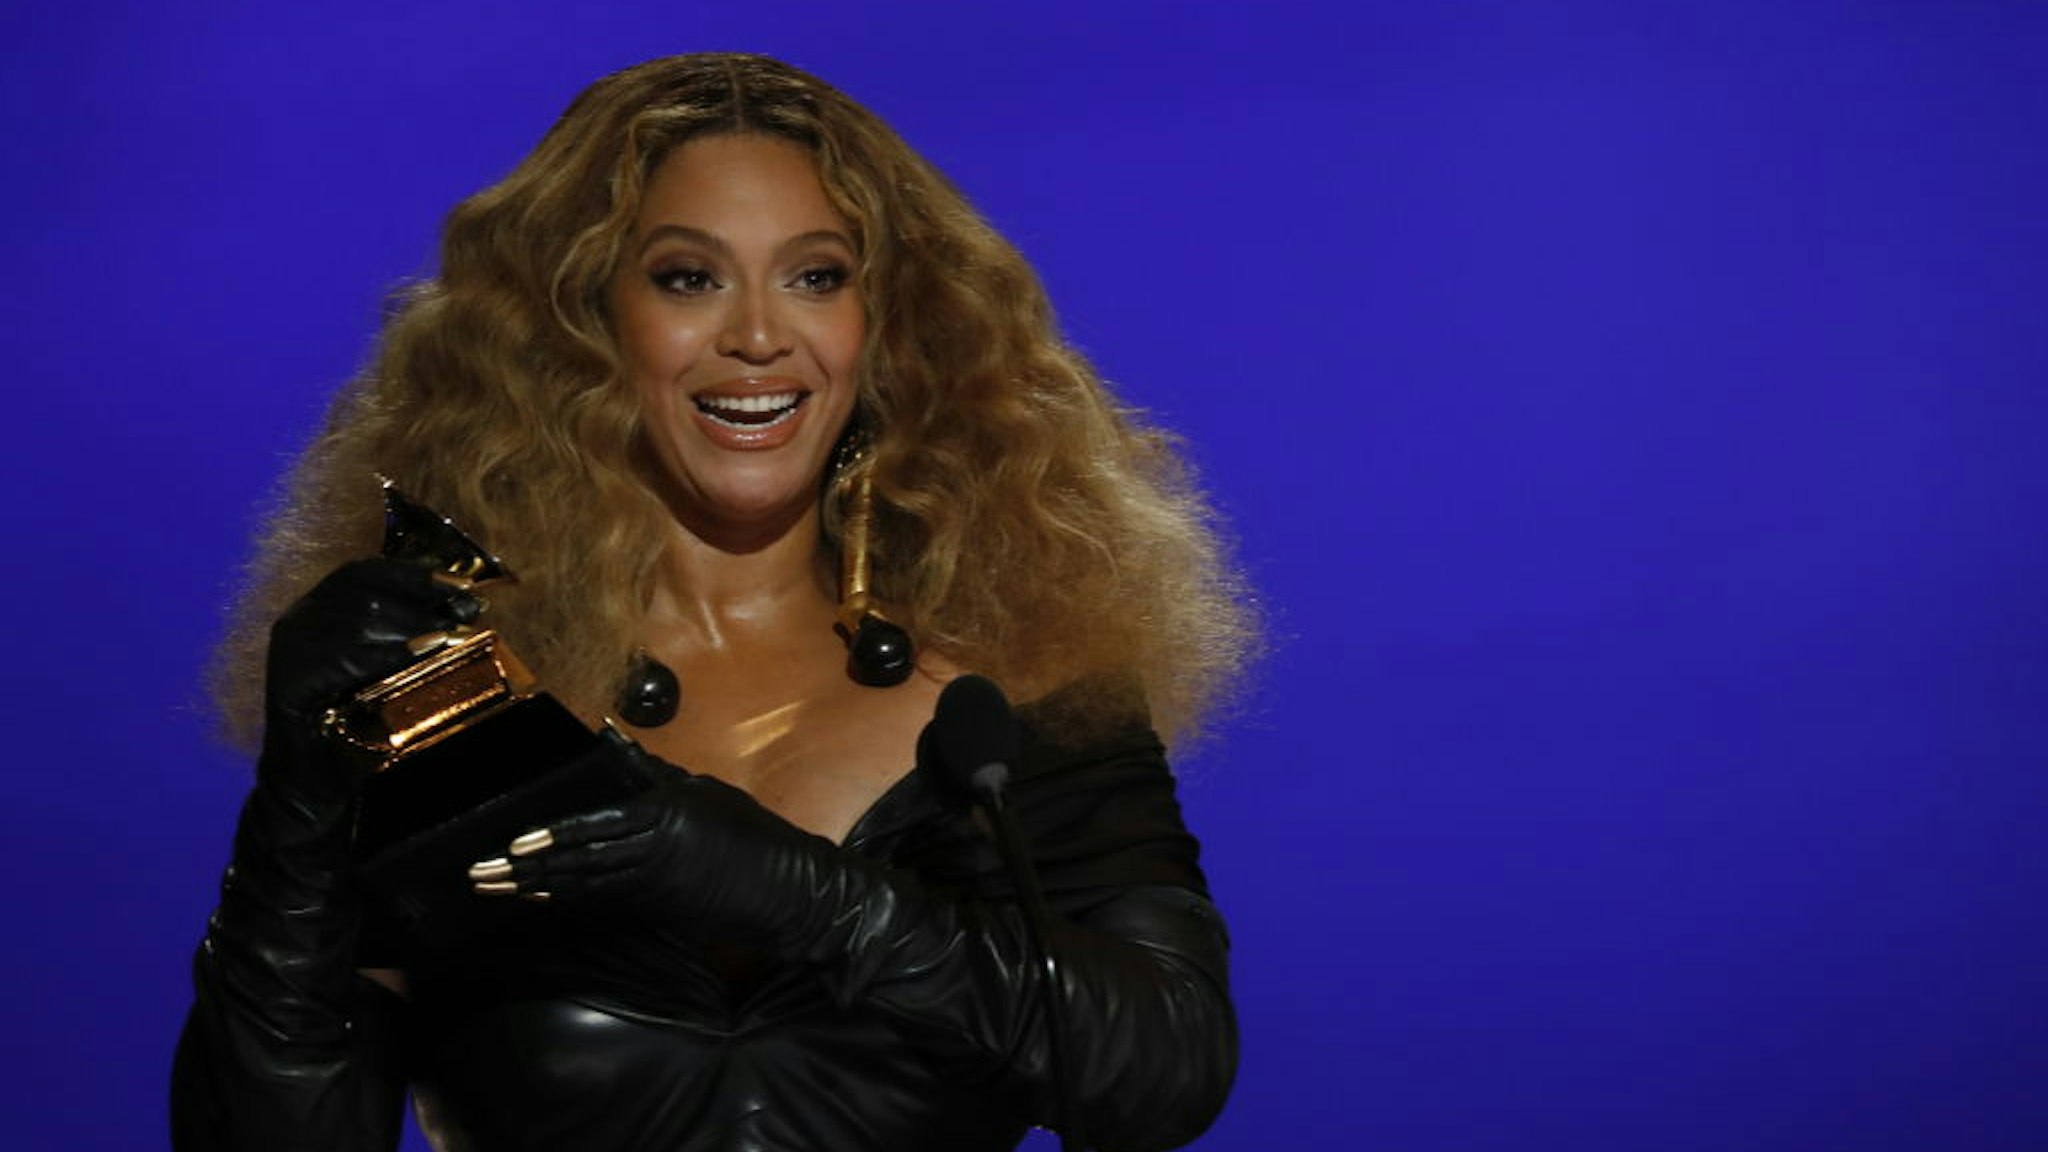 LOS ANGELES - MARCH 14: Beyoncé wins the award for Best R&amp;B Performance at THE 63rd ANNUAL GRAMMY® AWARDS, broadcast live from the STAPLES Center in Los Angeles, Sunday, March 14, 2021 (8:00-11:30 PM, live ET/5:00-8:30 PM, live PT) on the CBS Television Network and Paramount+. (Photo by Cliff Lipson/CBS via Getty Images)